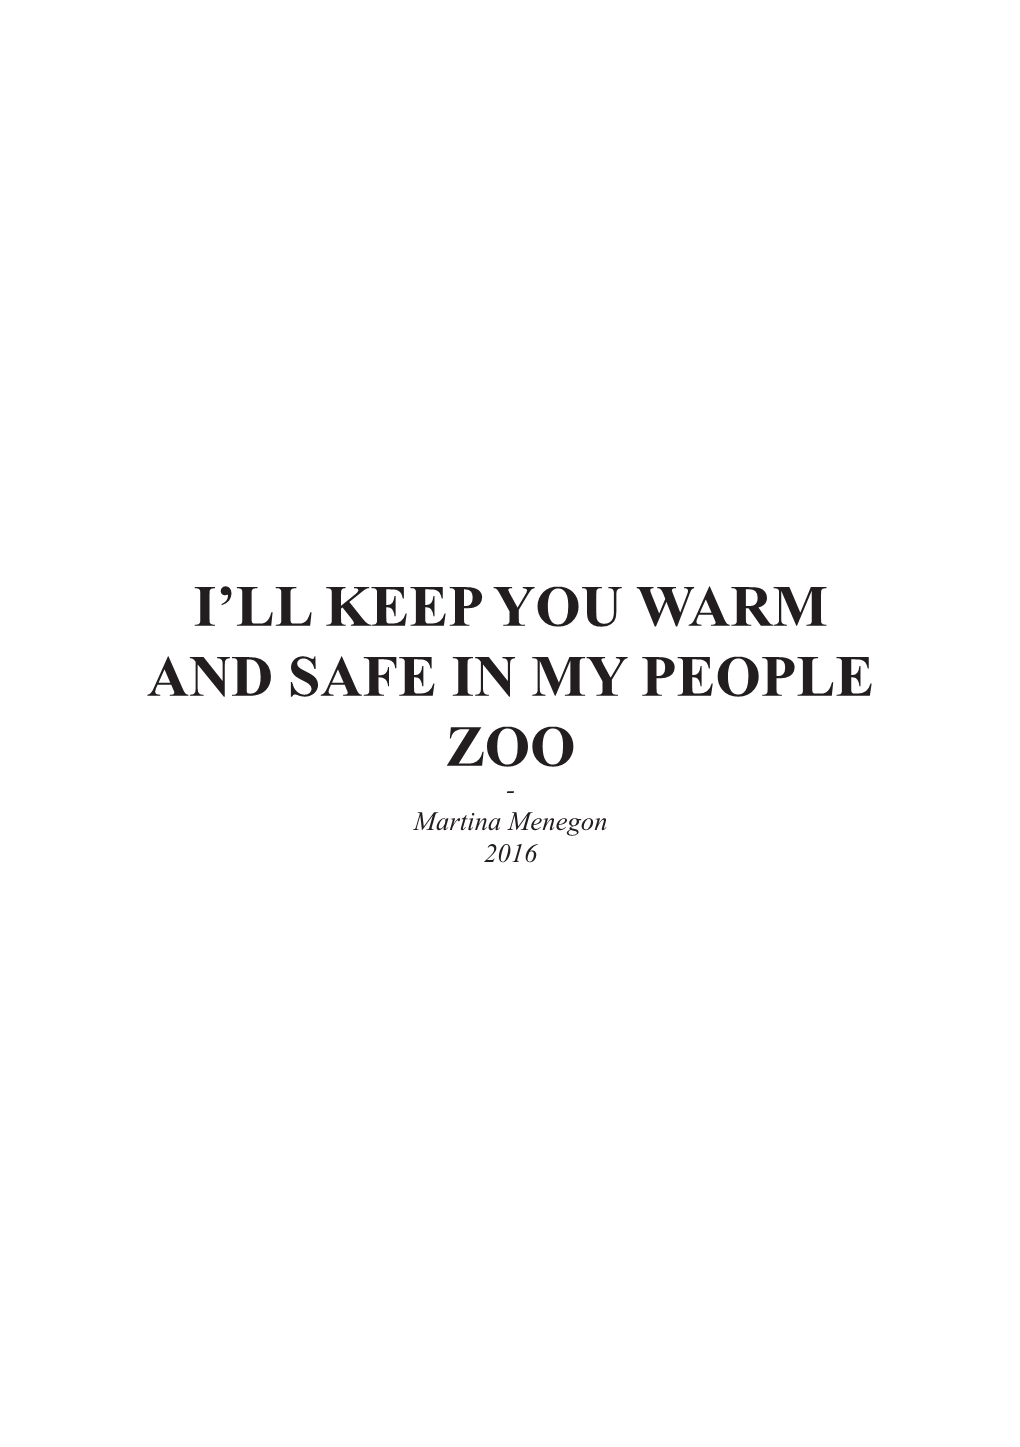 I'll Keep You Warm and Safe in My People